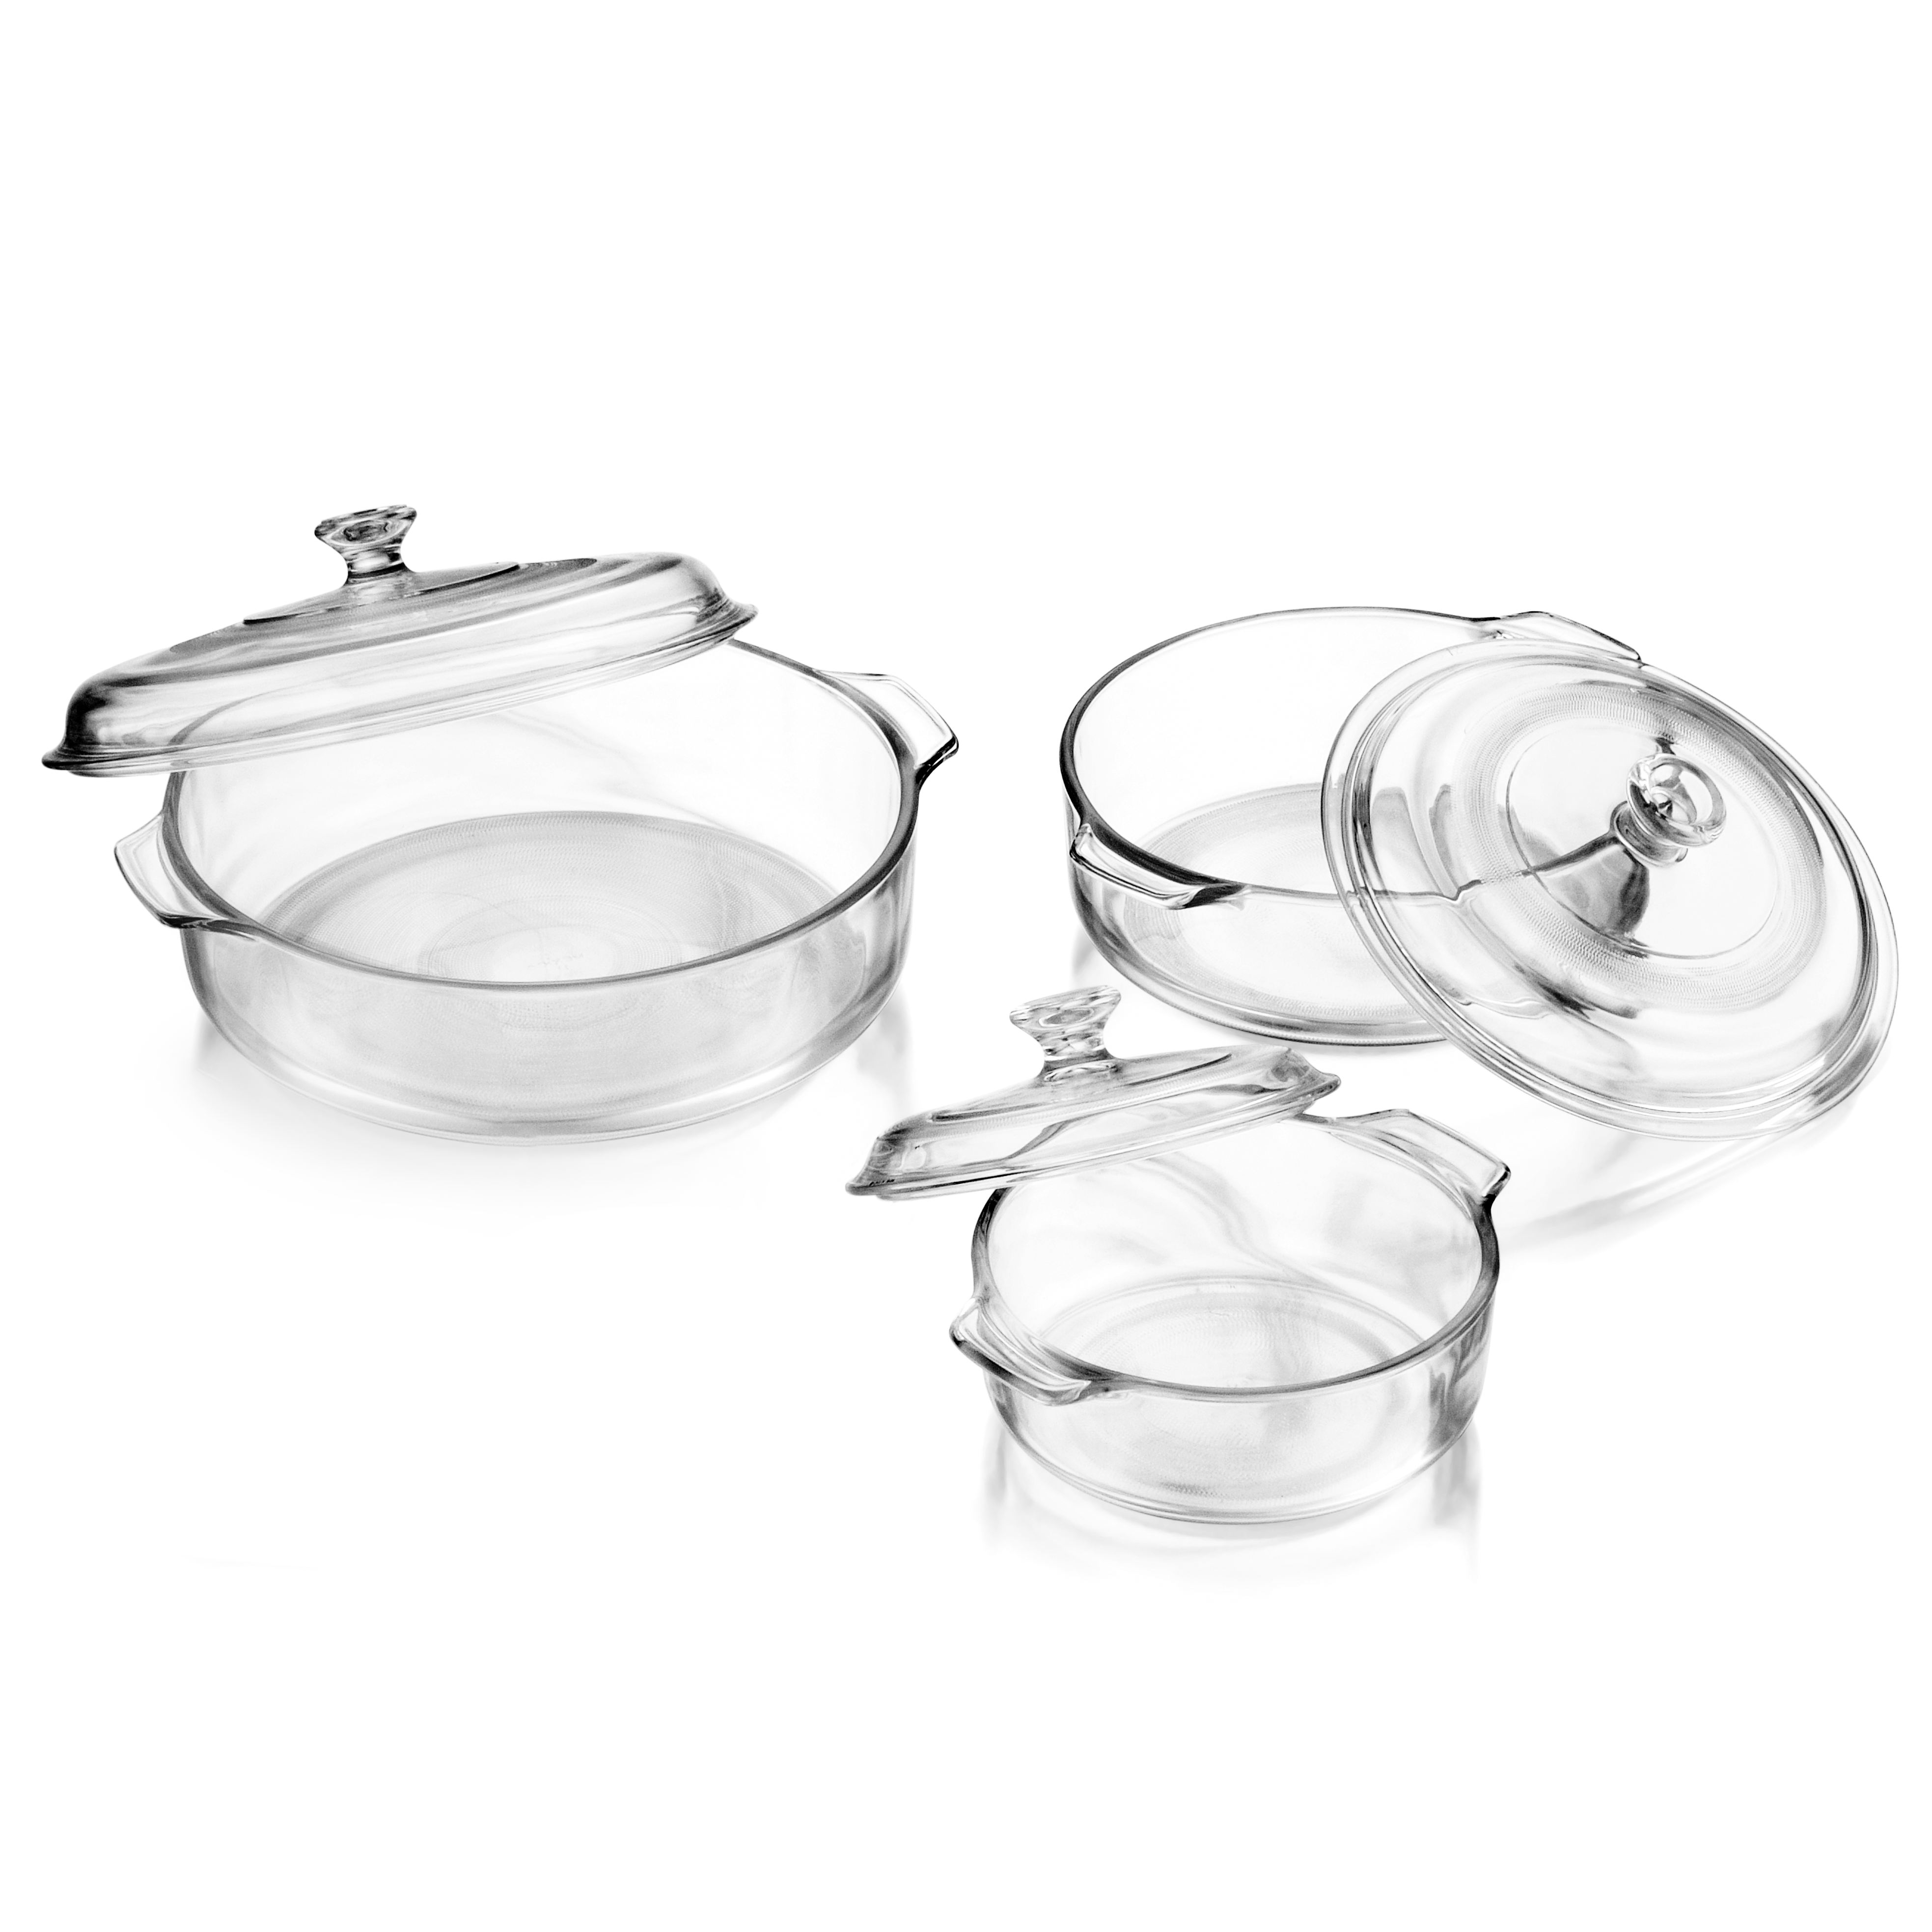 Libbey Baker's Basics 3-Piece Glass Casserole Baking Dish Set with Glass Covers - image 5 of 5